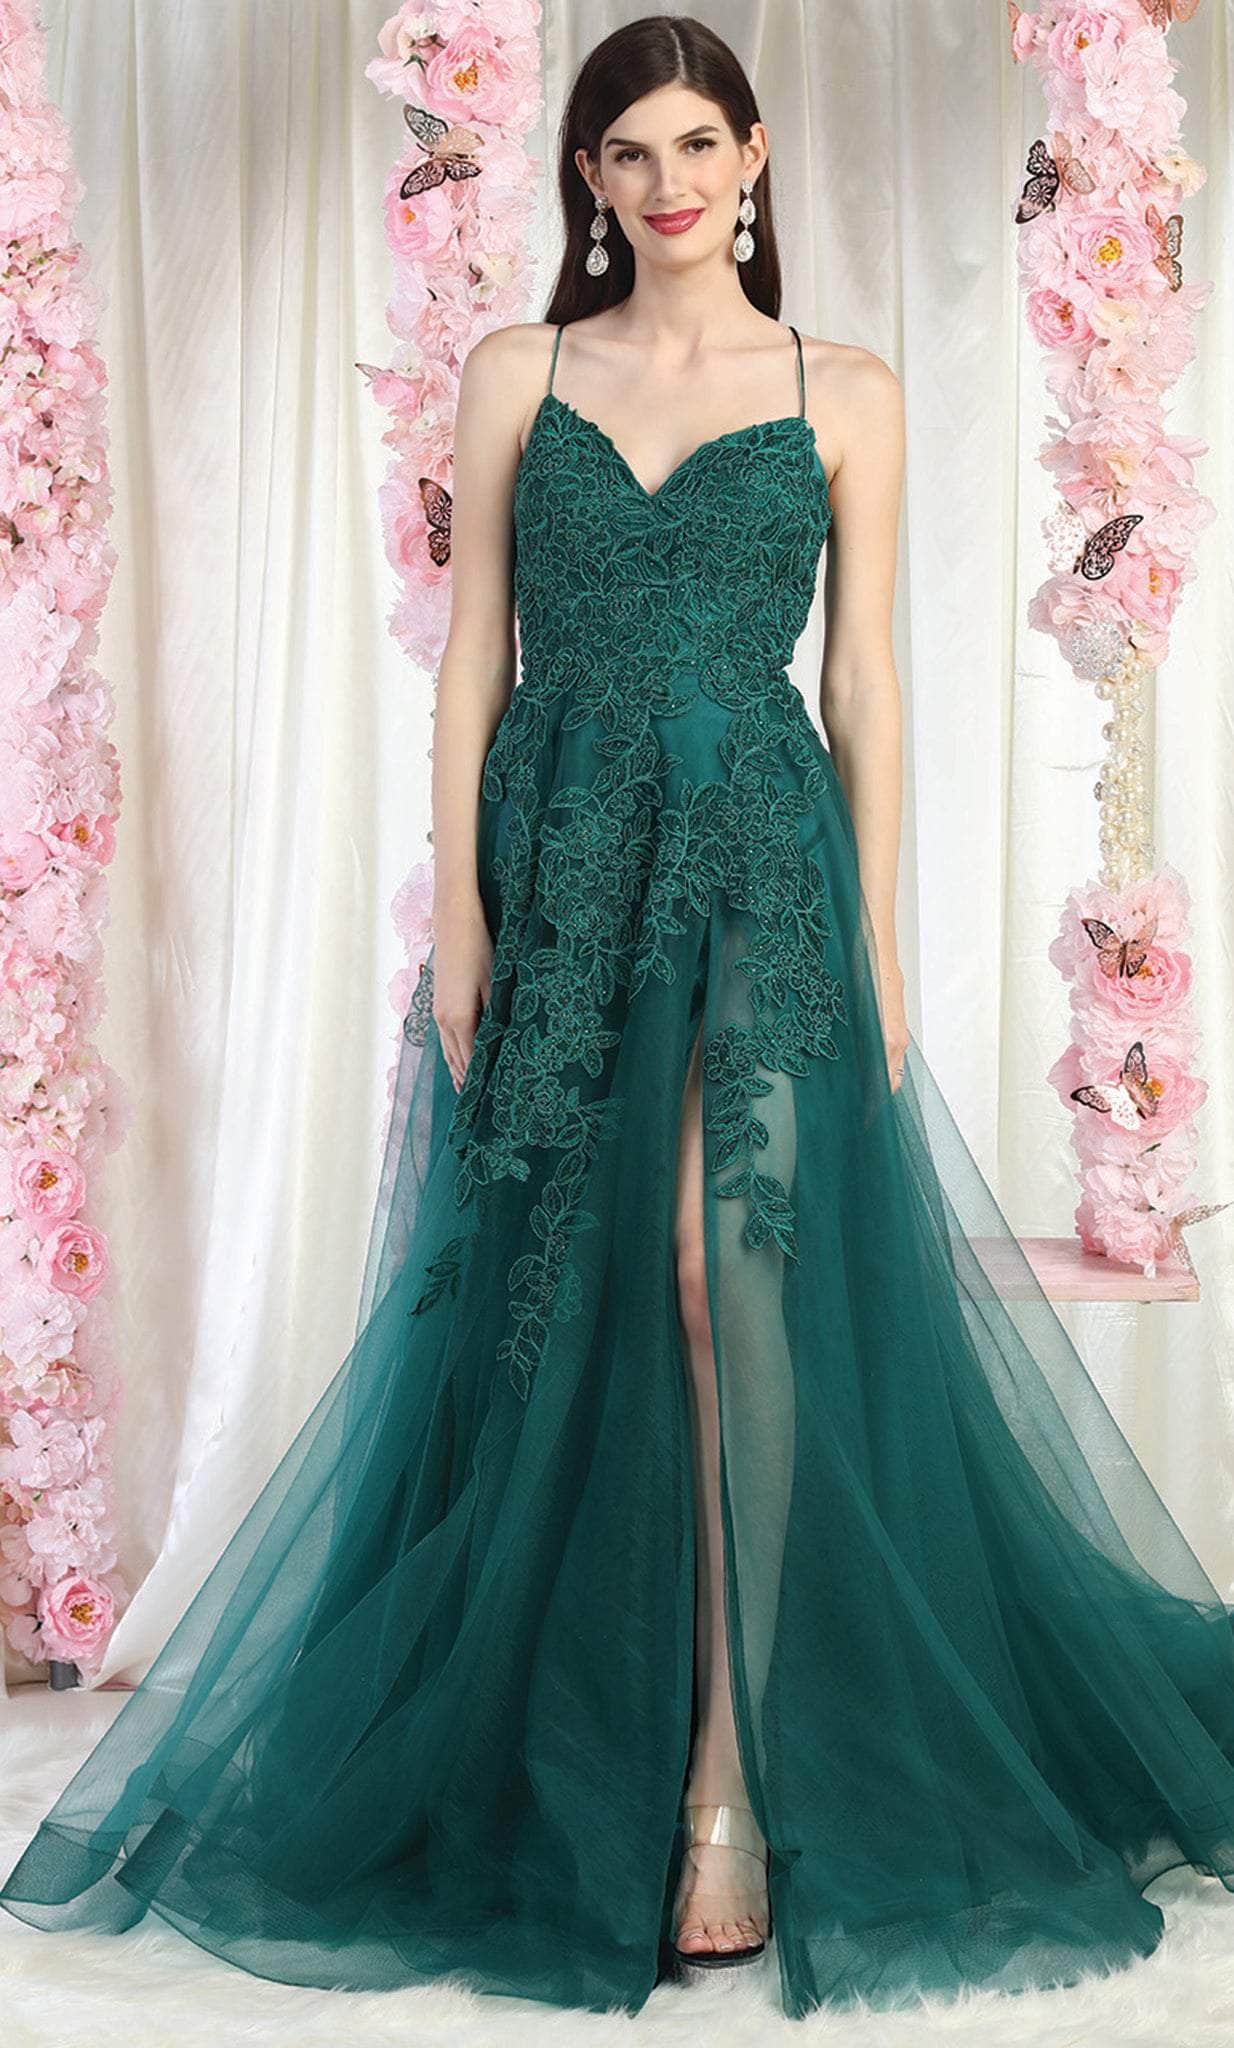 Image of May Queen MQ2013 - Applique Tulle Prom Dress